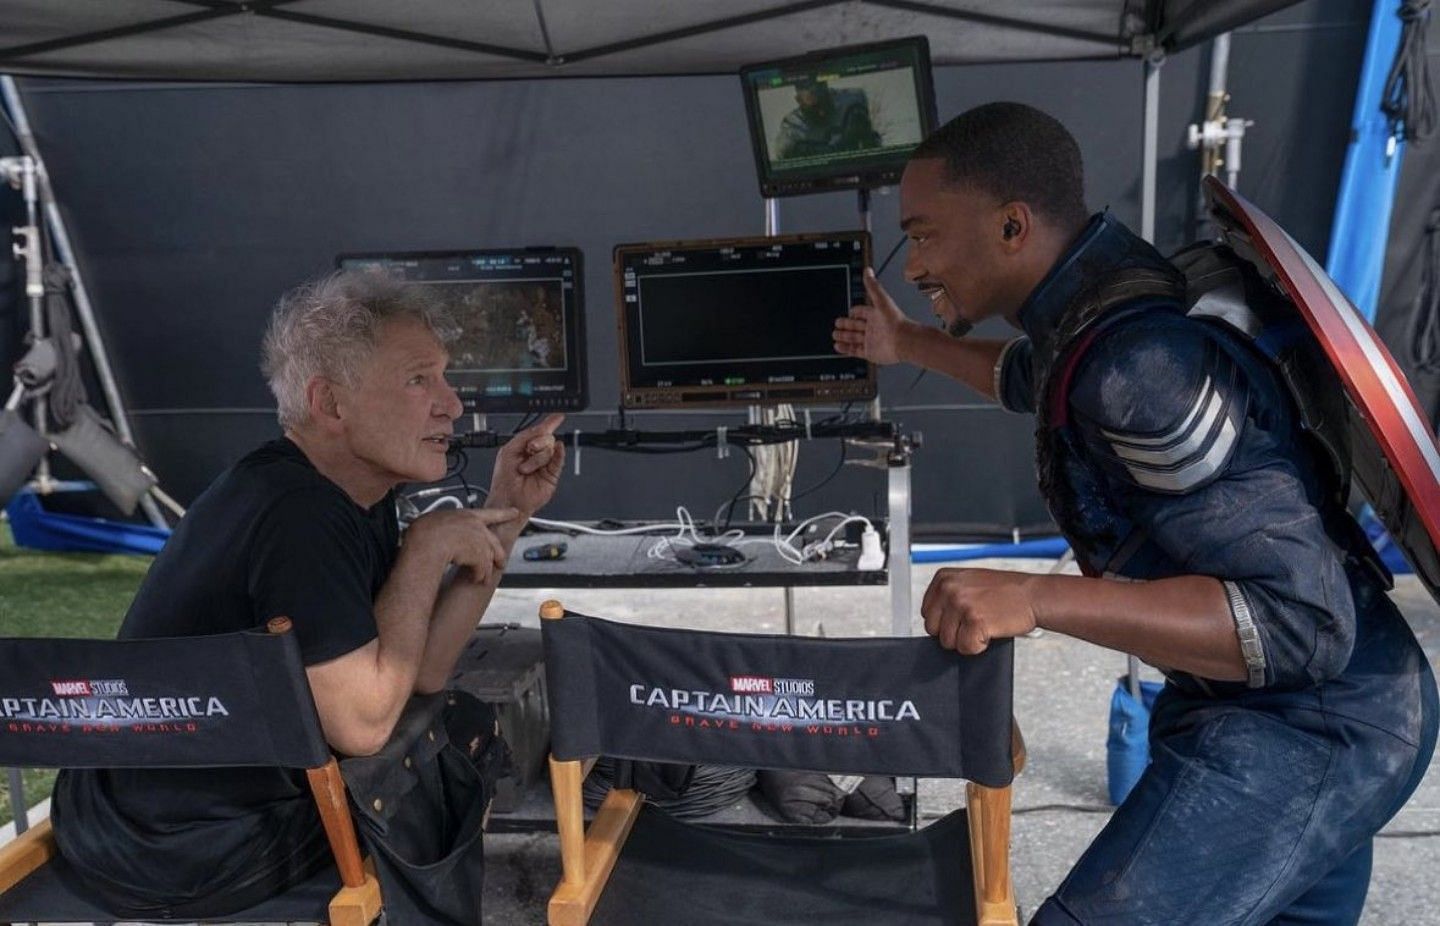 Harrison Ford and Anthony Mackie on the set of Captain America 4 (Image via @anthonymackie on Instagram)